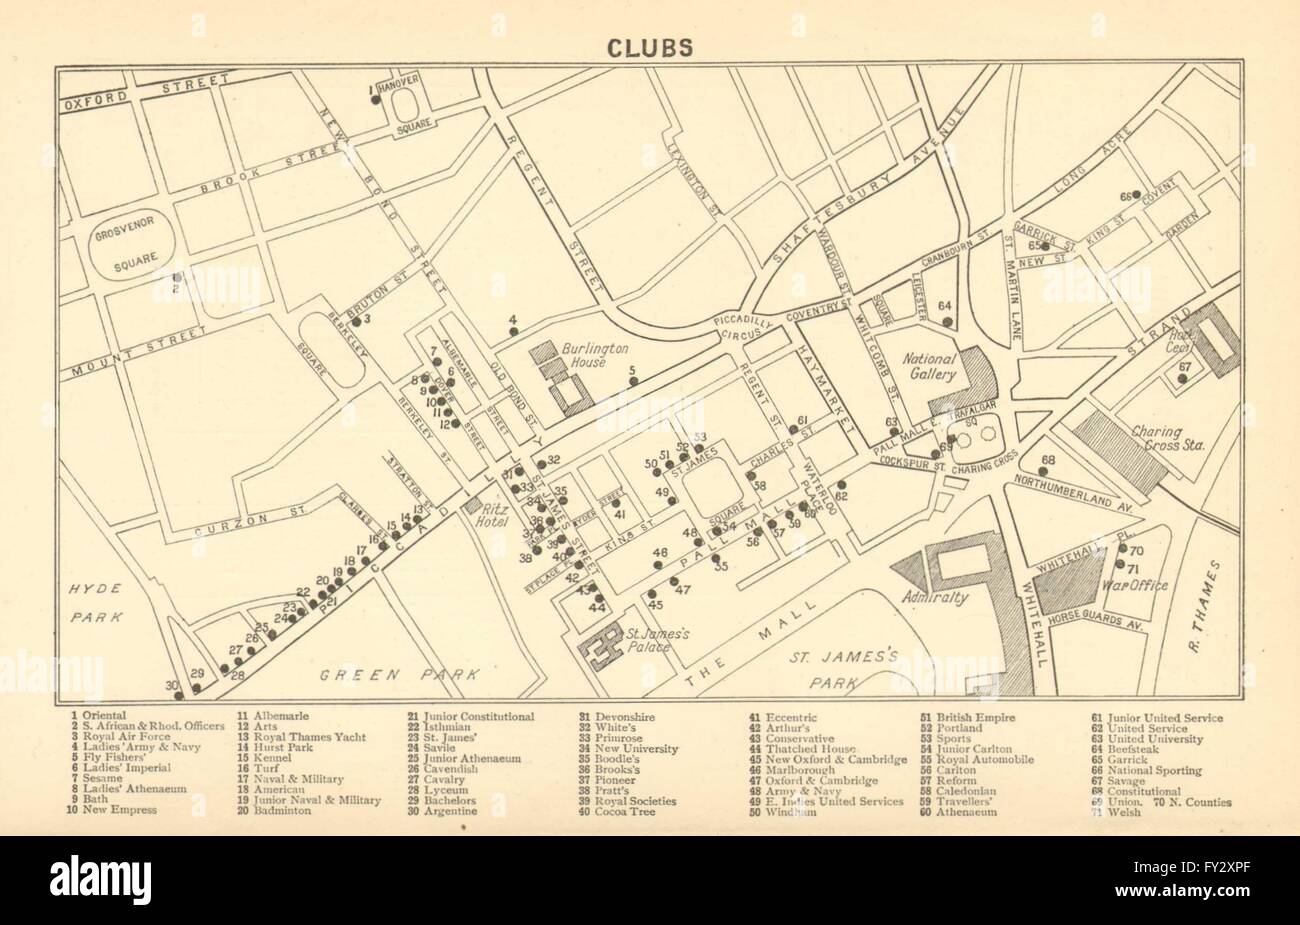 LONDON GENTLEMENS CLUBS: St James's Mayfair Piccadilly Whitehall, 1921 old map Stock Photo